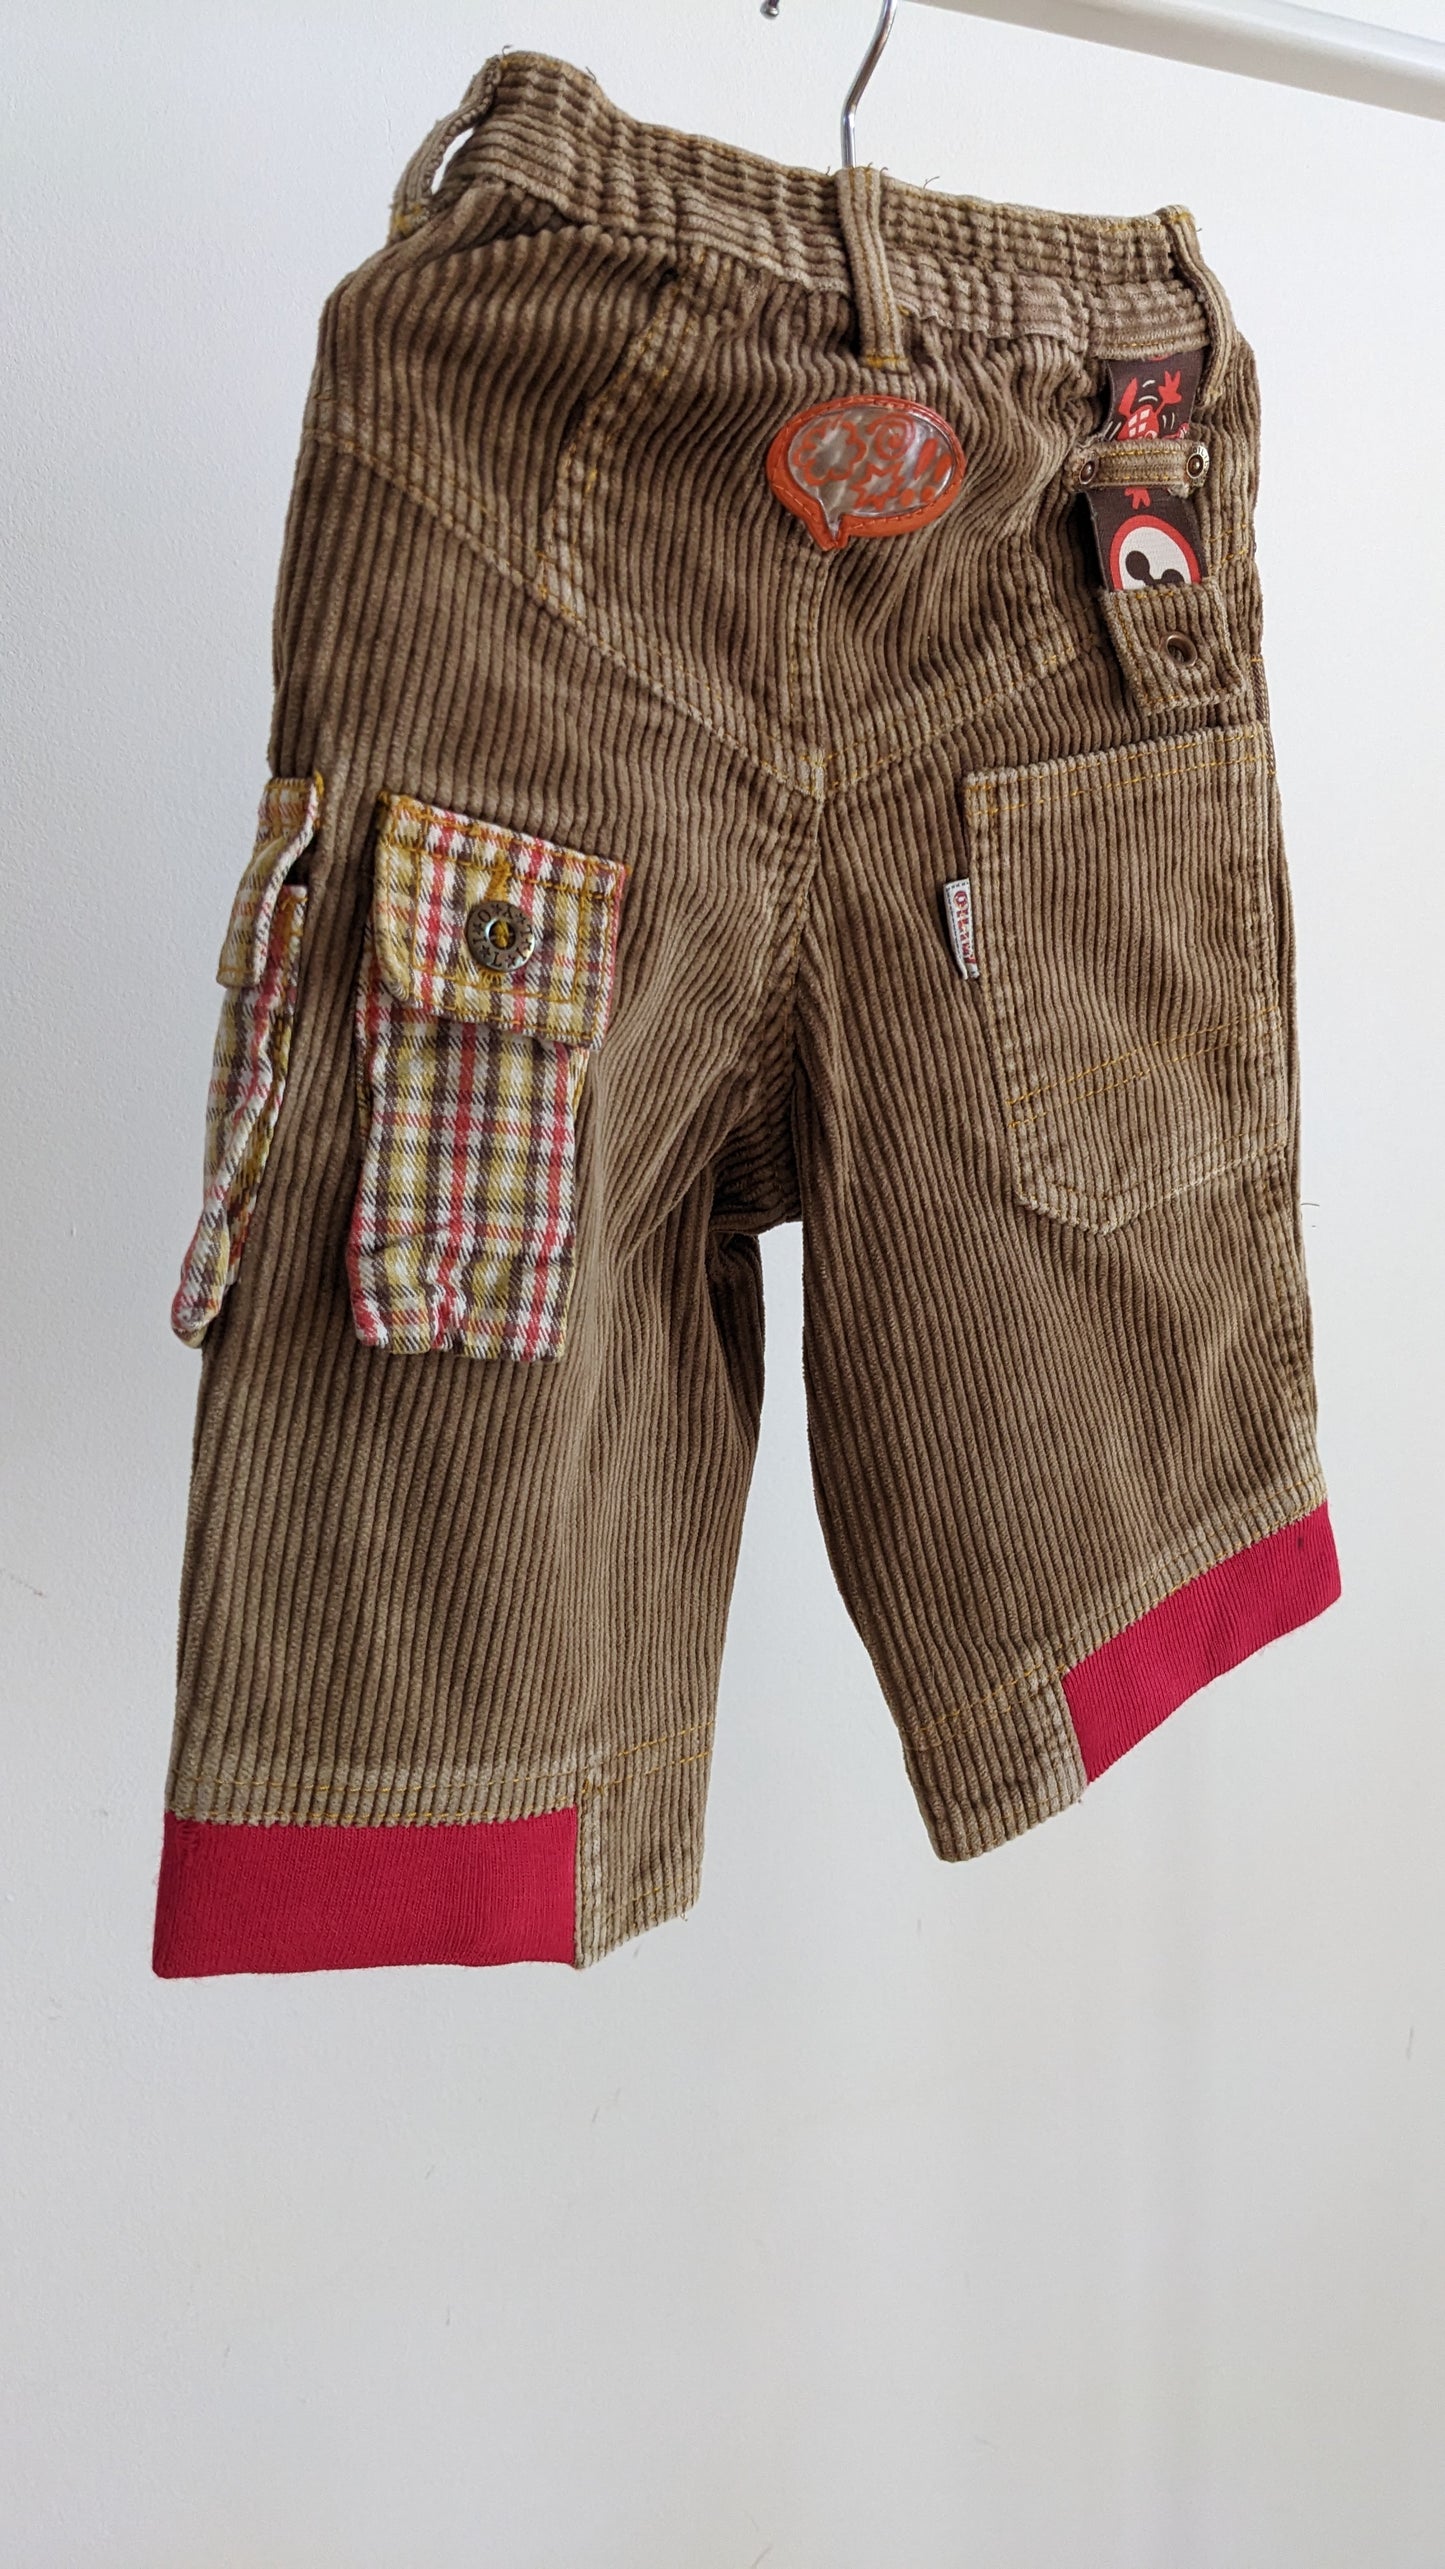 Oilily corduroy pants with pocket